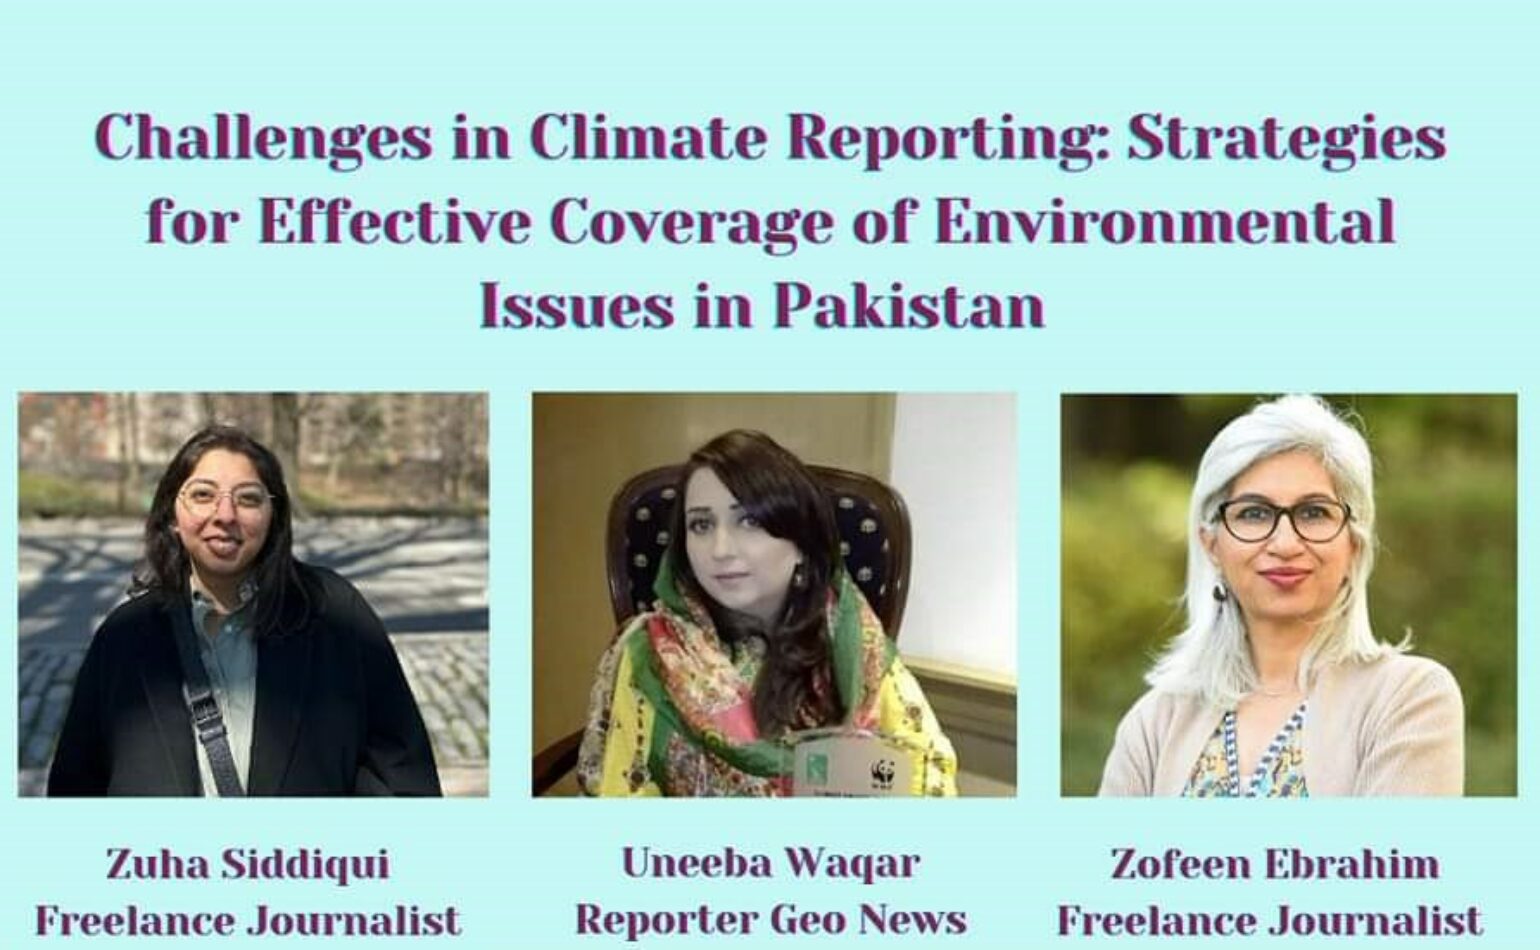 Pakistan’s Environment Crisis 2: Journalists Emphasize Consistent Coverage of Environmental Issues 